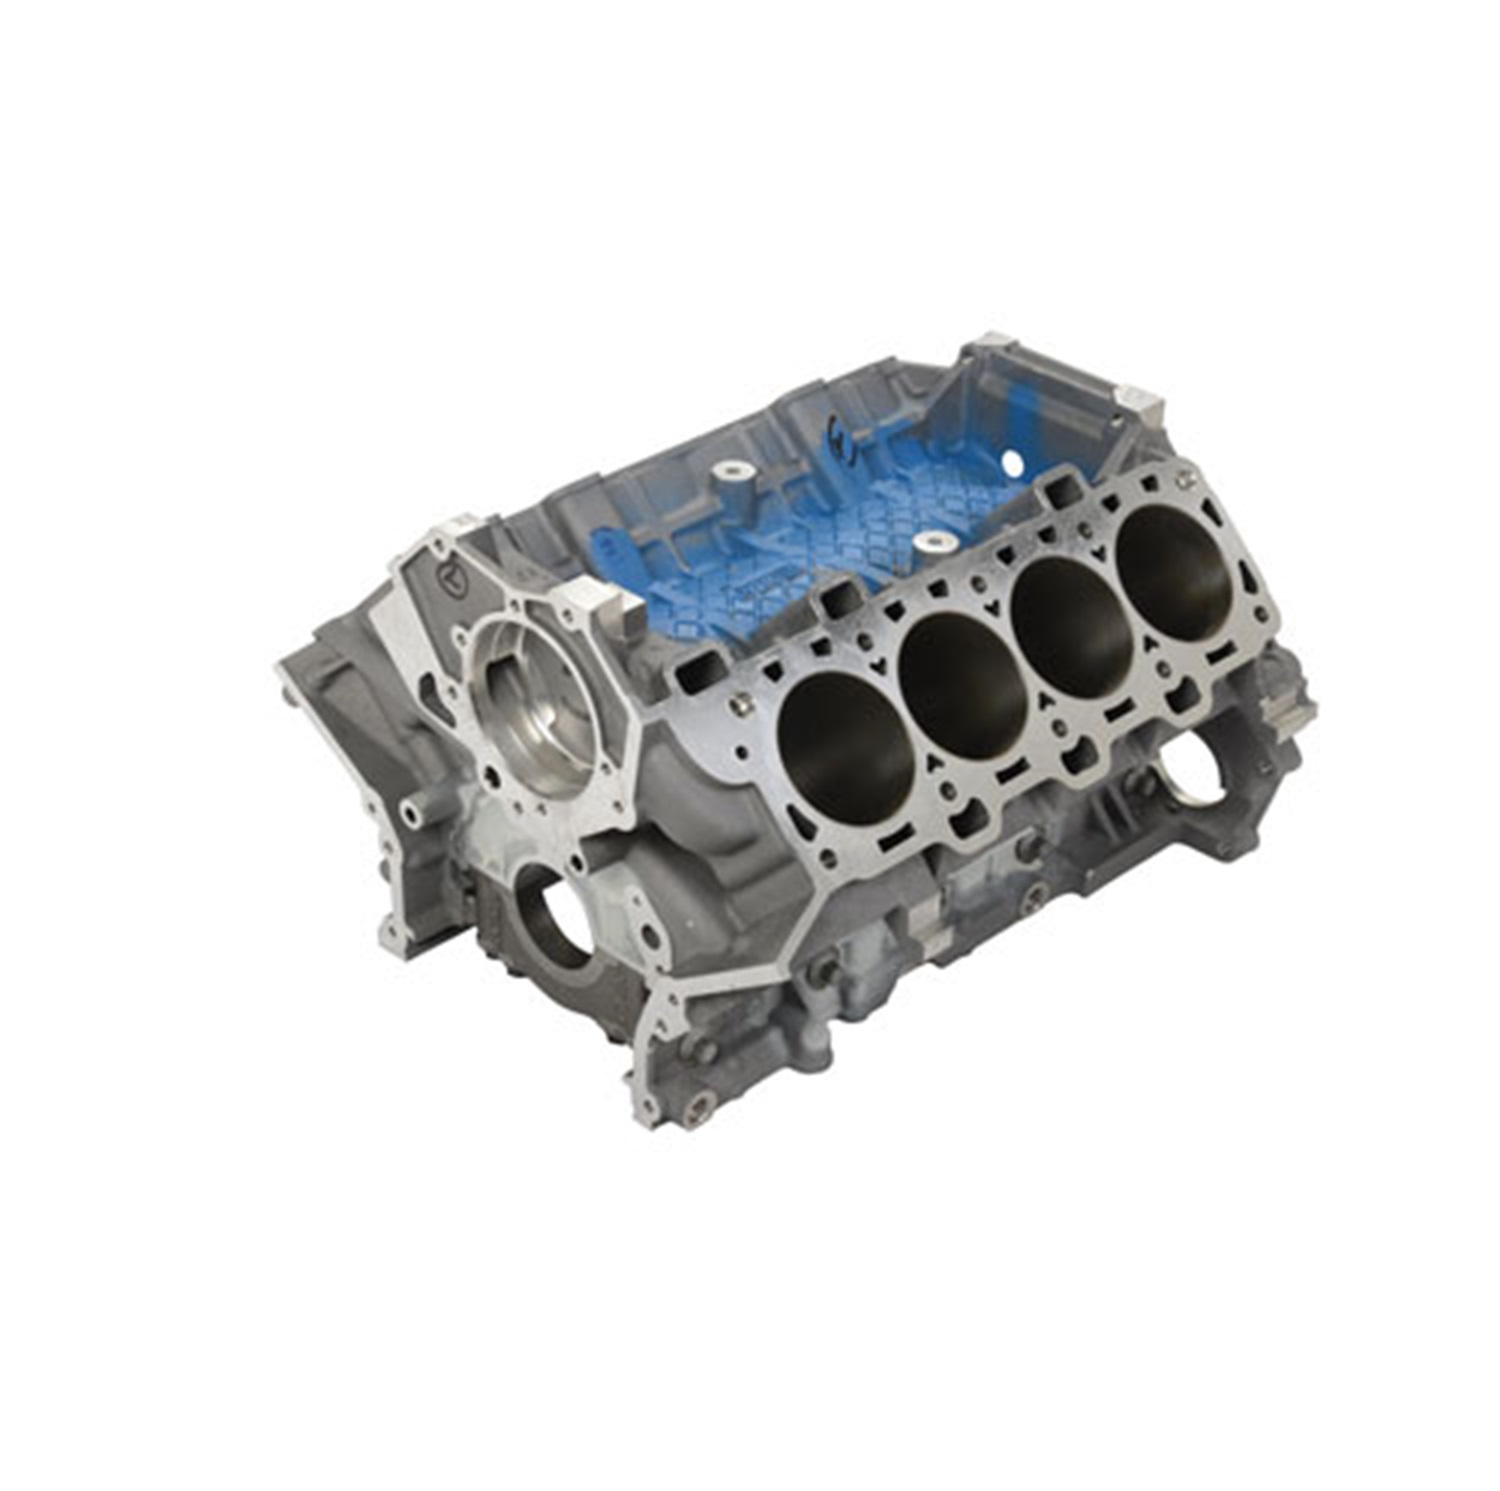 Ford Racing Ford Racing M-6010-M50R Coyote 5.0L Engine Block